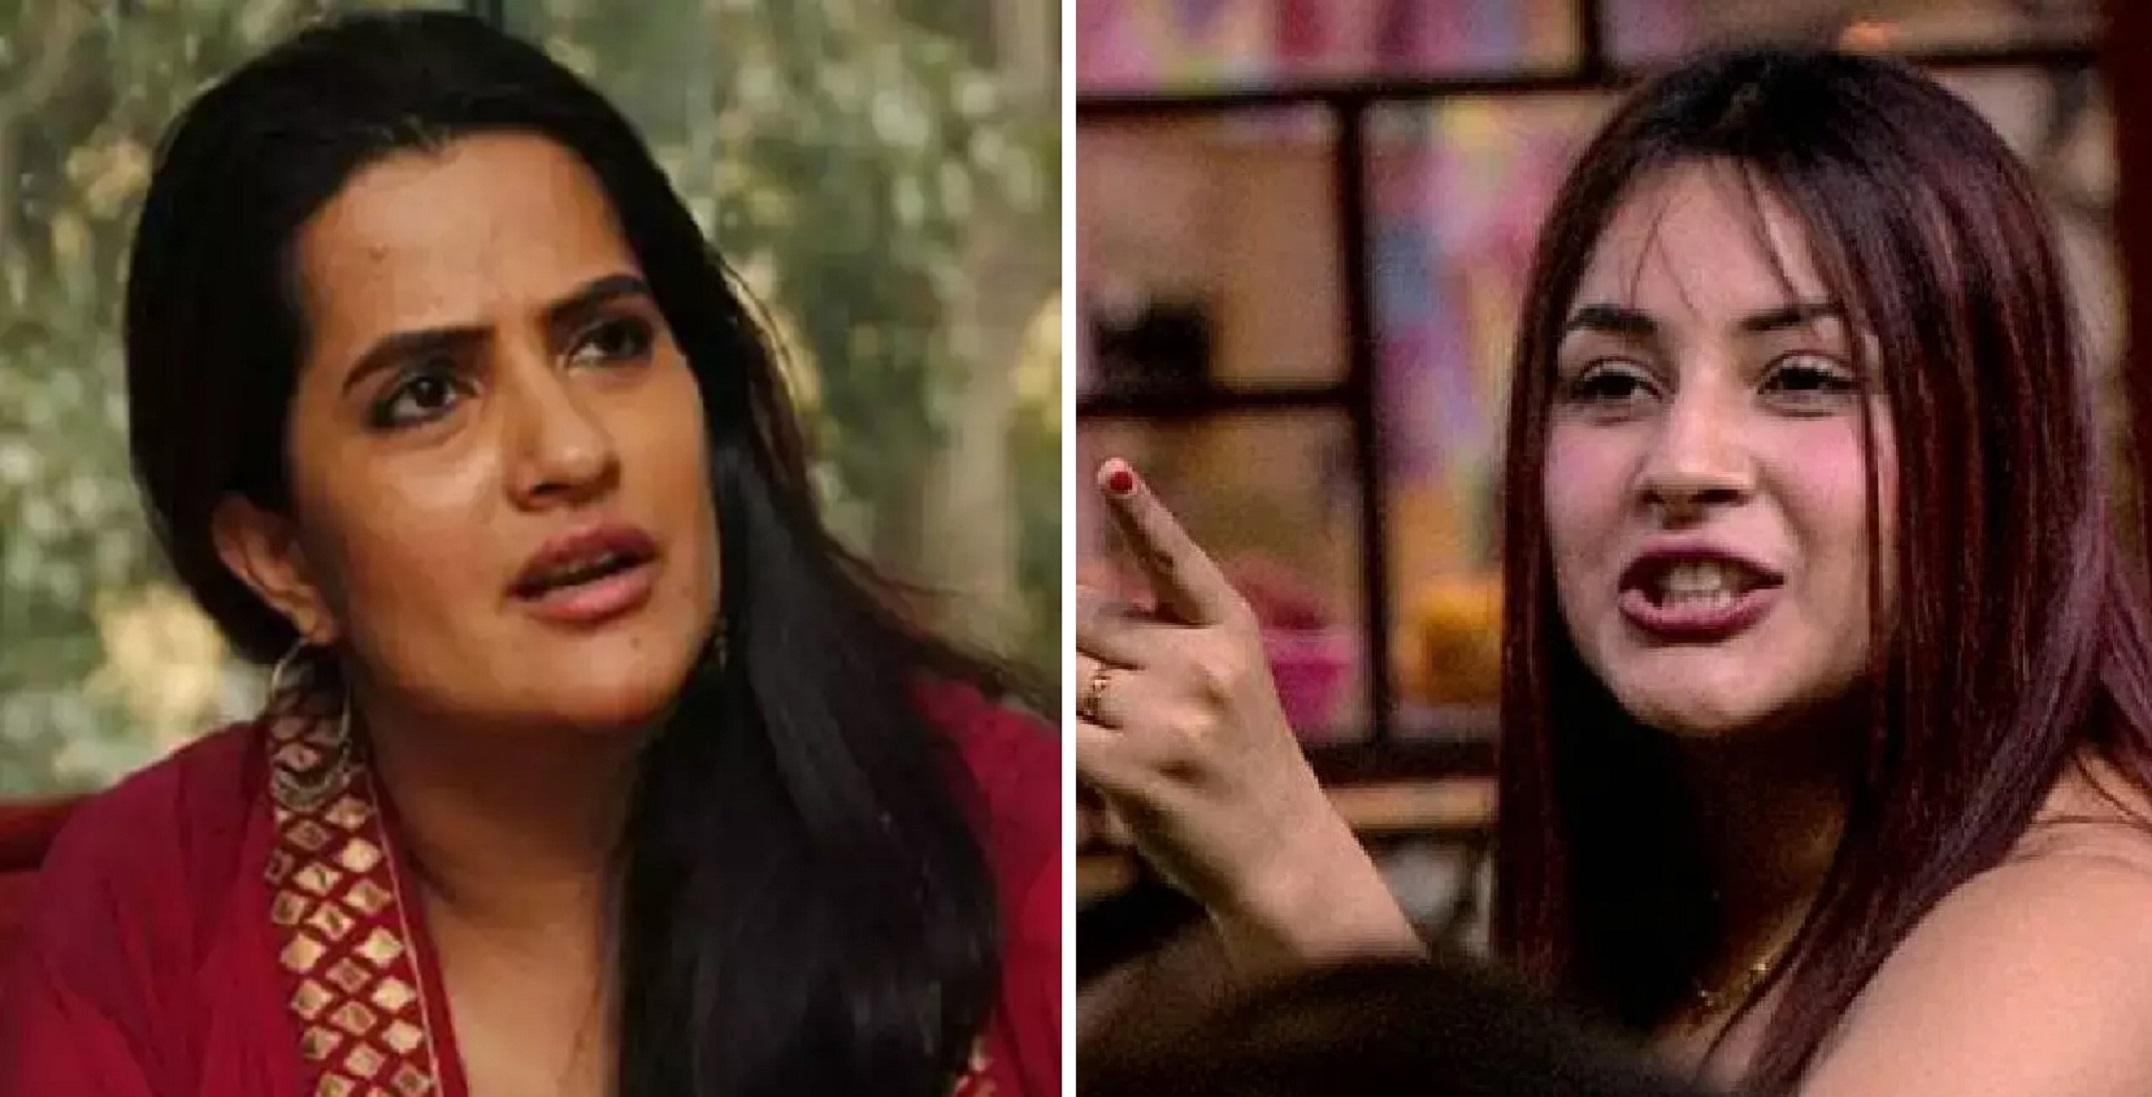 Sona Mohapatra Slams Shehnaaz Gill, ‘Don’t know what her talent is, apart from reality TV fame’